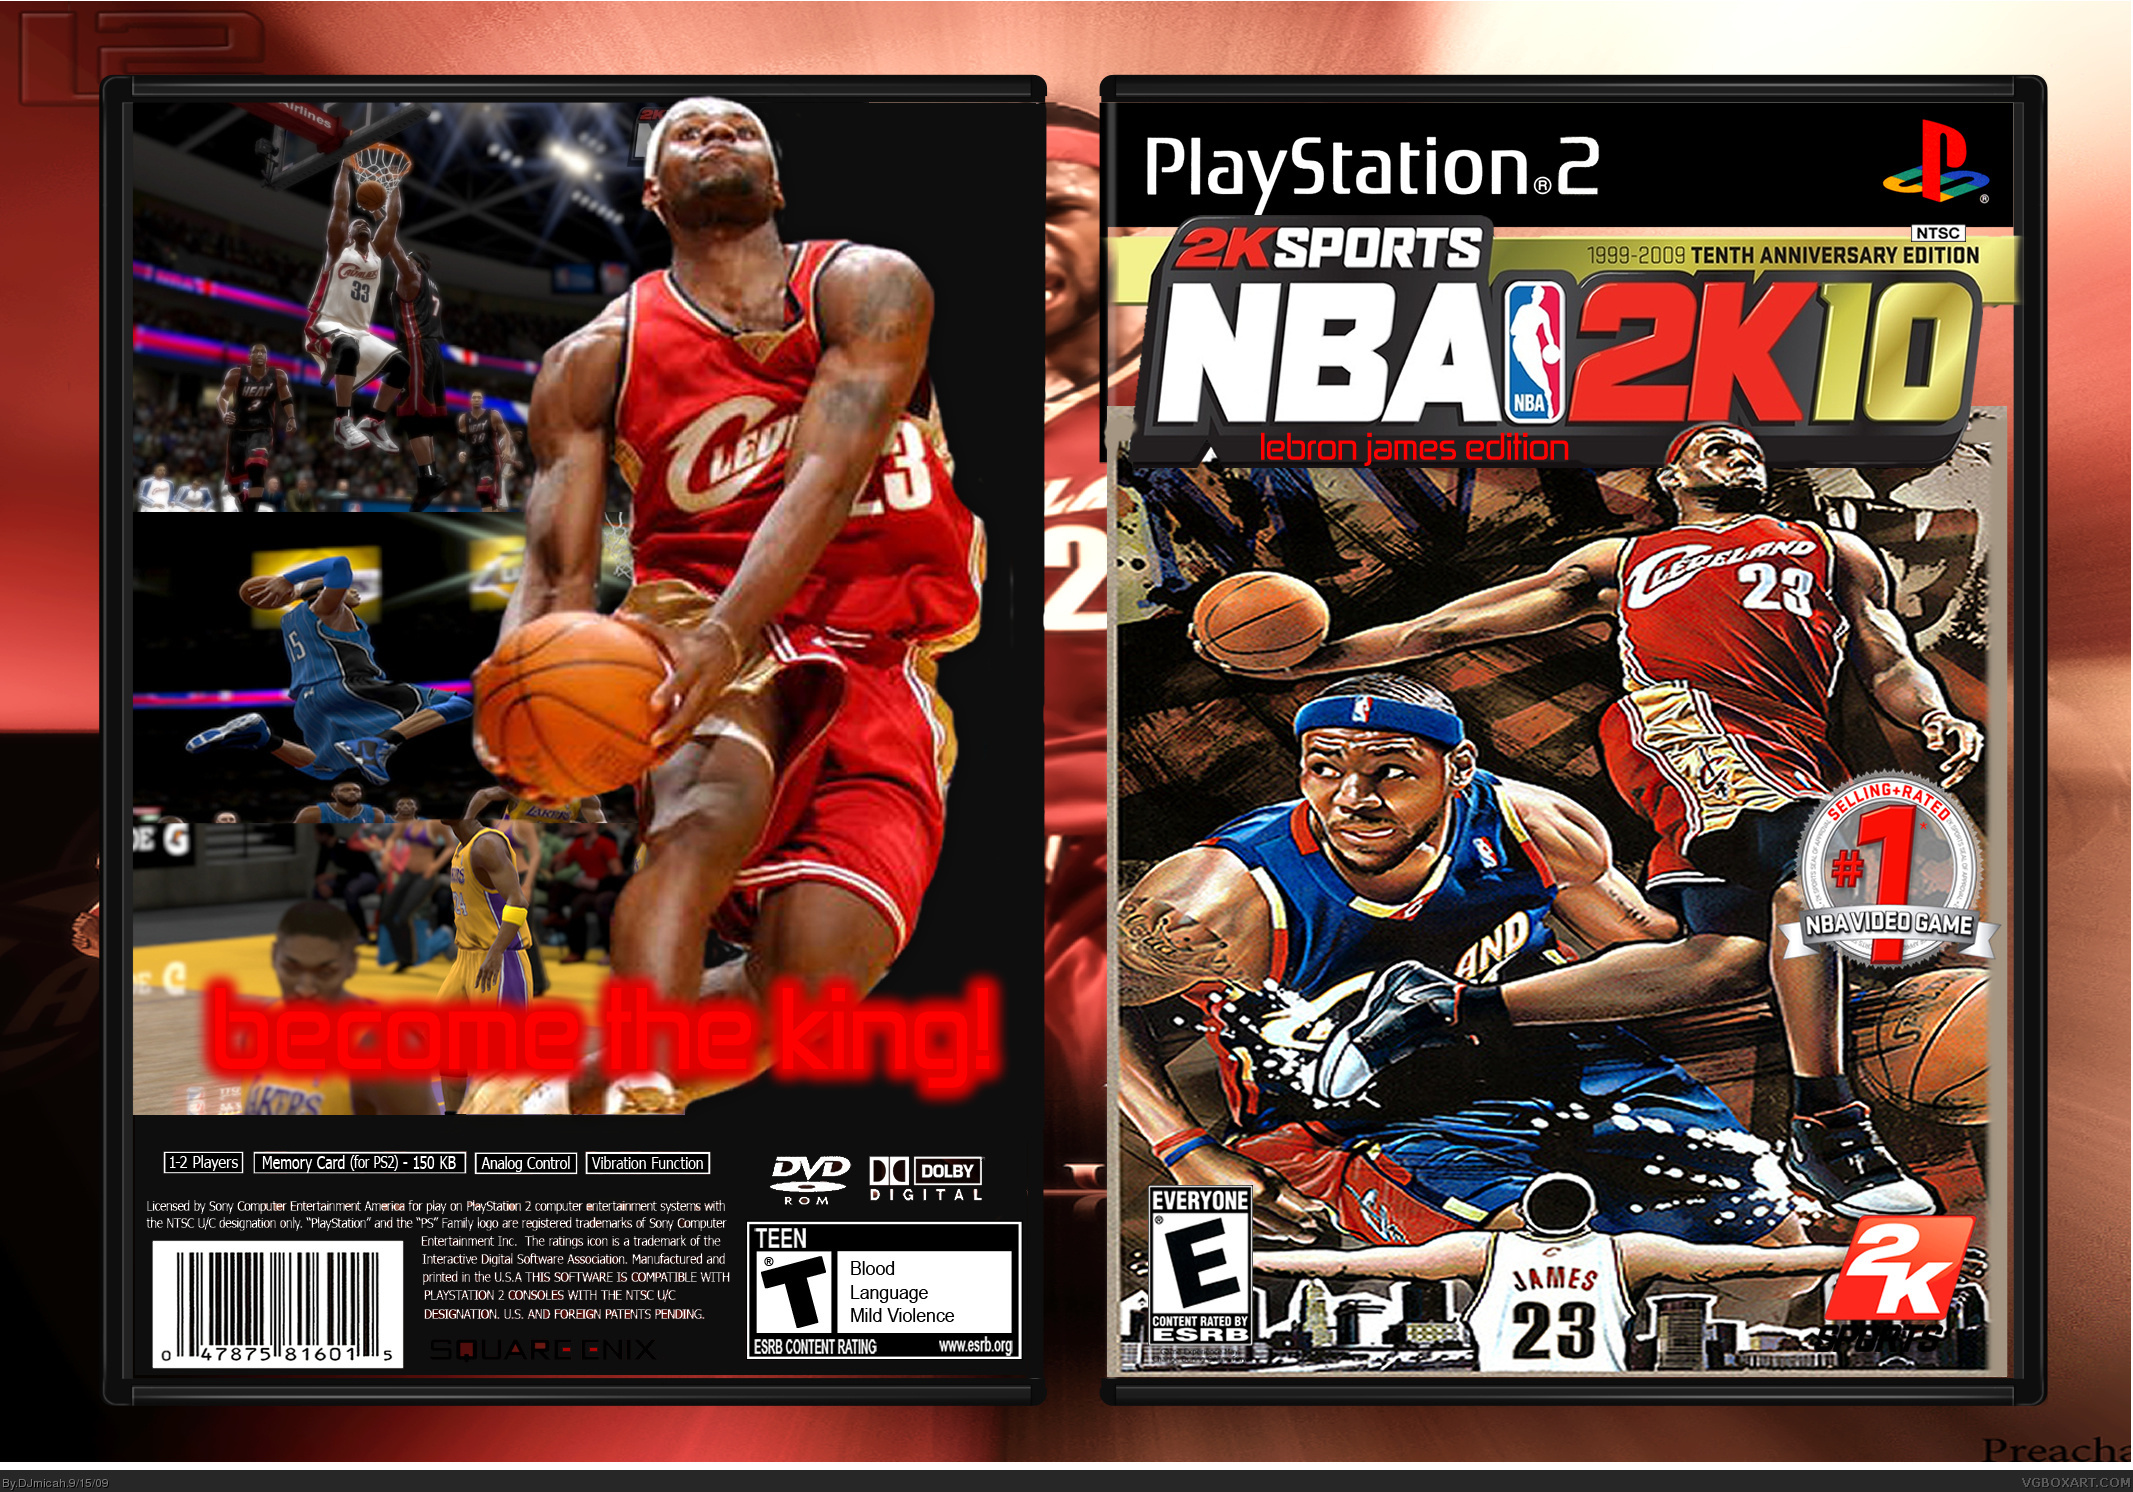 Viewing full size NBA 2k10 box cover